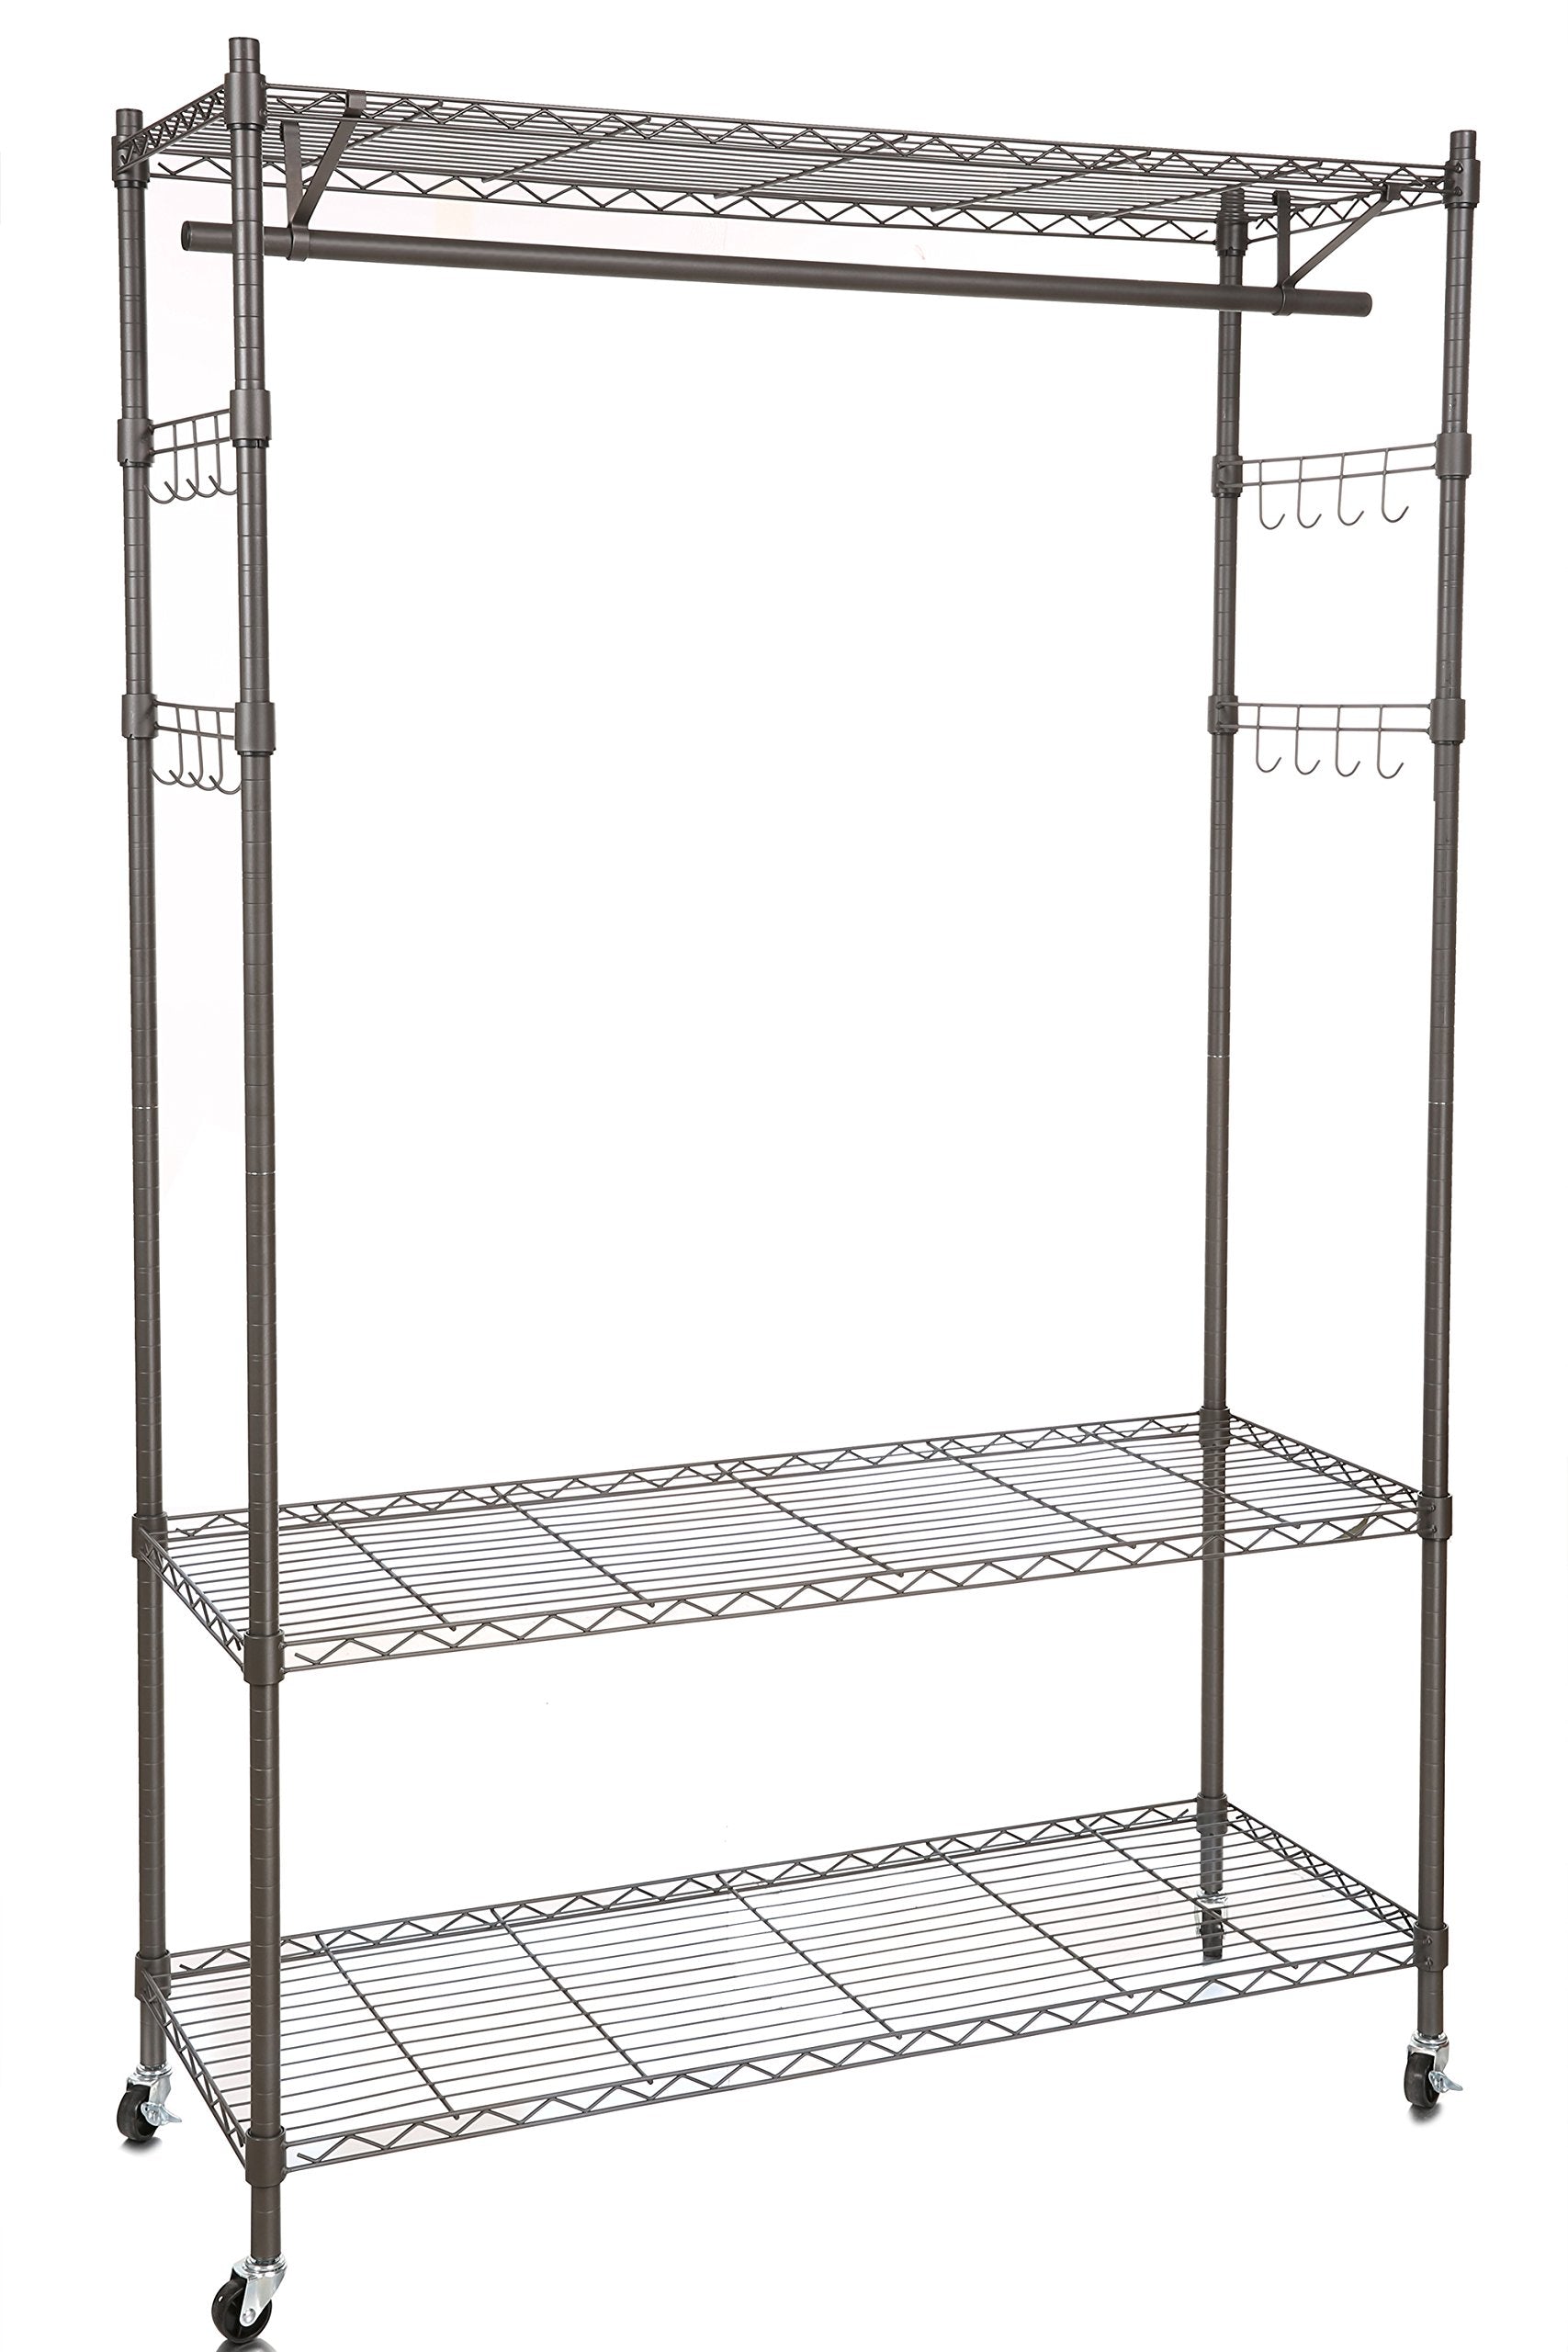 Homdox Heavy Duty Garment Rack with Closet Organizer Storage, Clothing  Racks for Hanging Clothes with Wire Metal Baskets Drawer, Large Size  Commercial